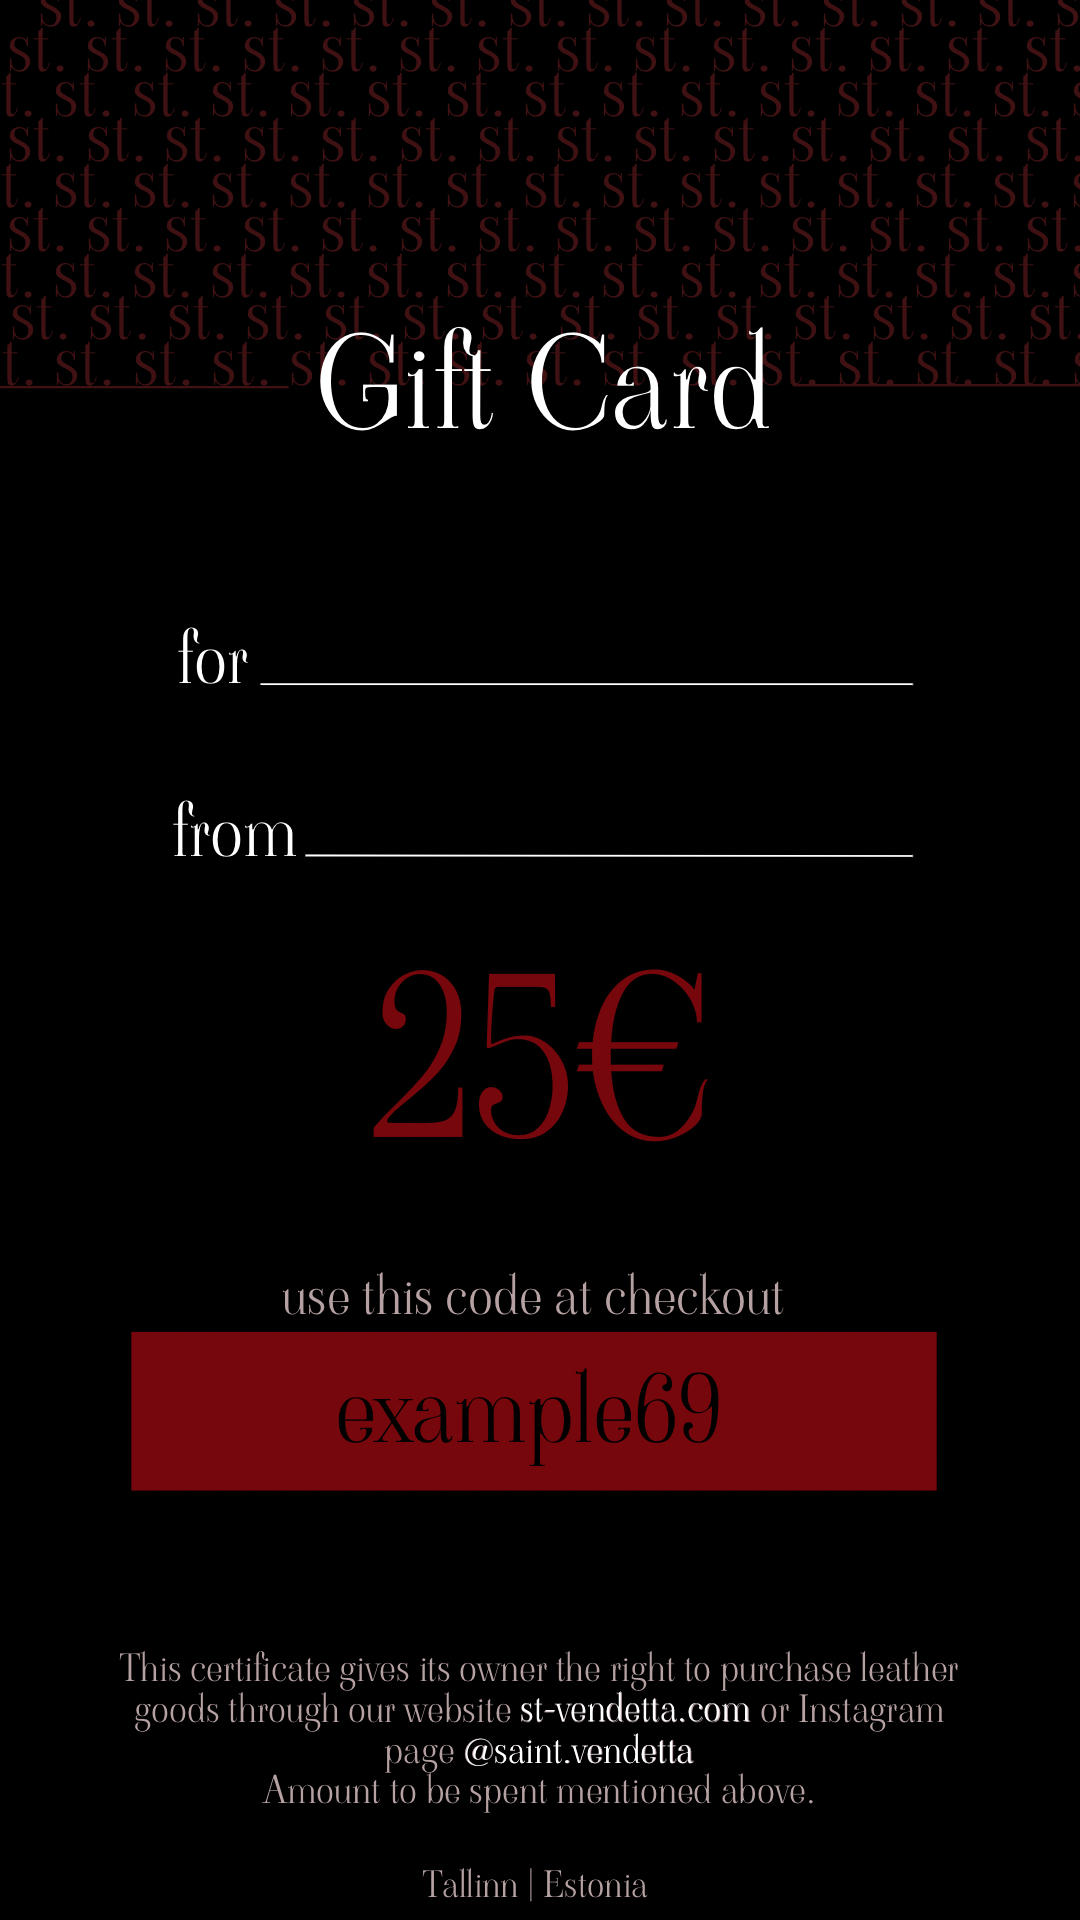 Gift Card for 25€